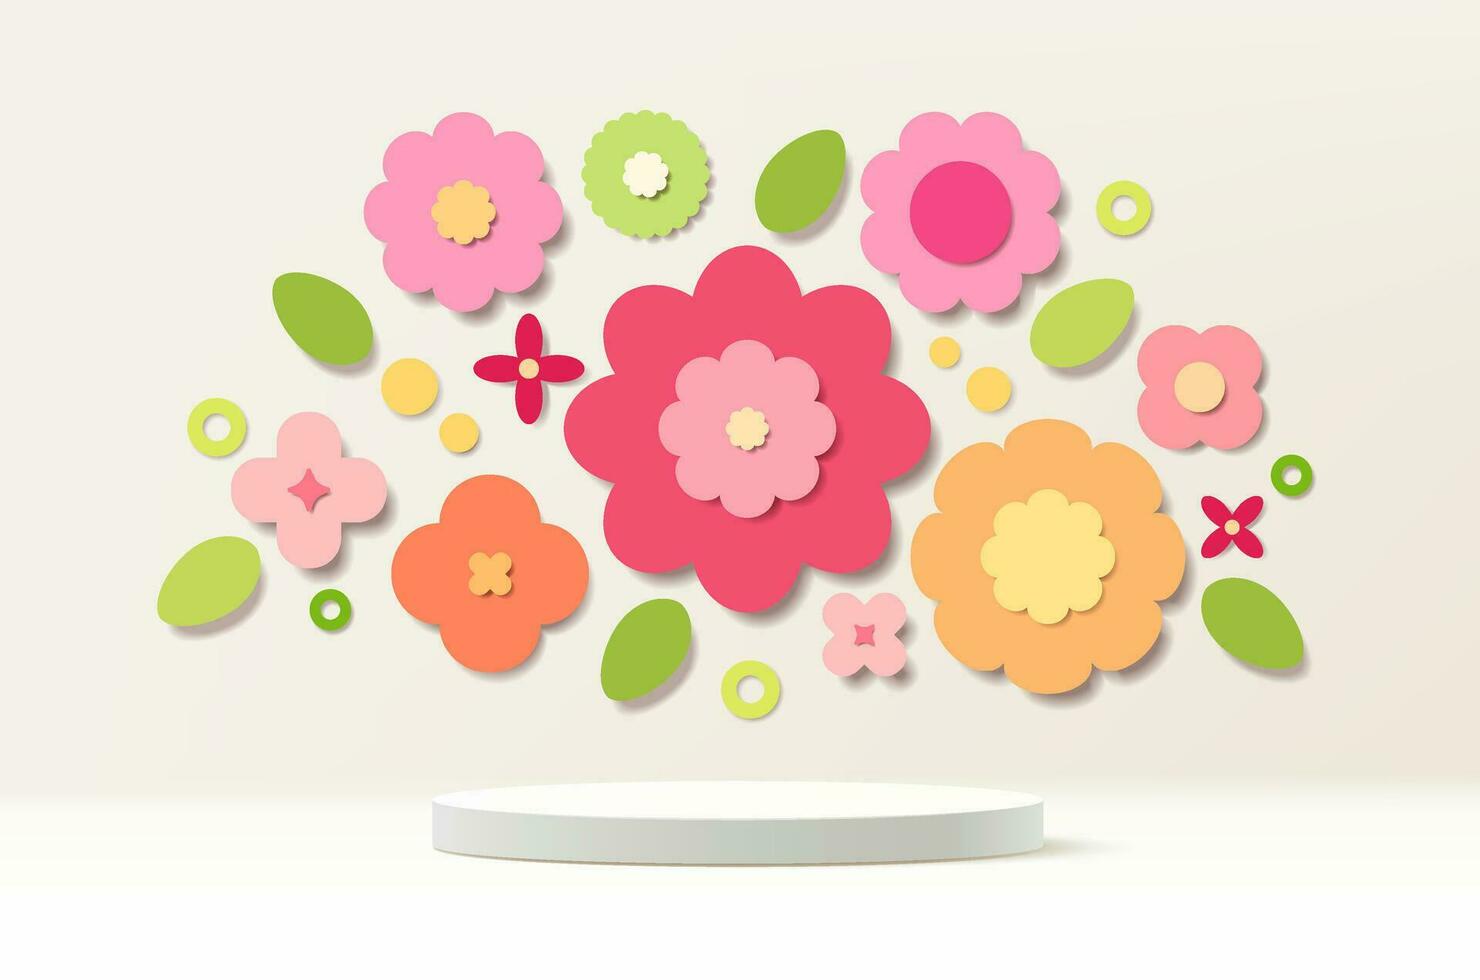 Vector background with cute florals design in paper cut style.